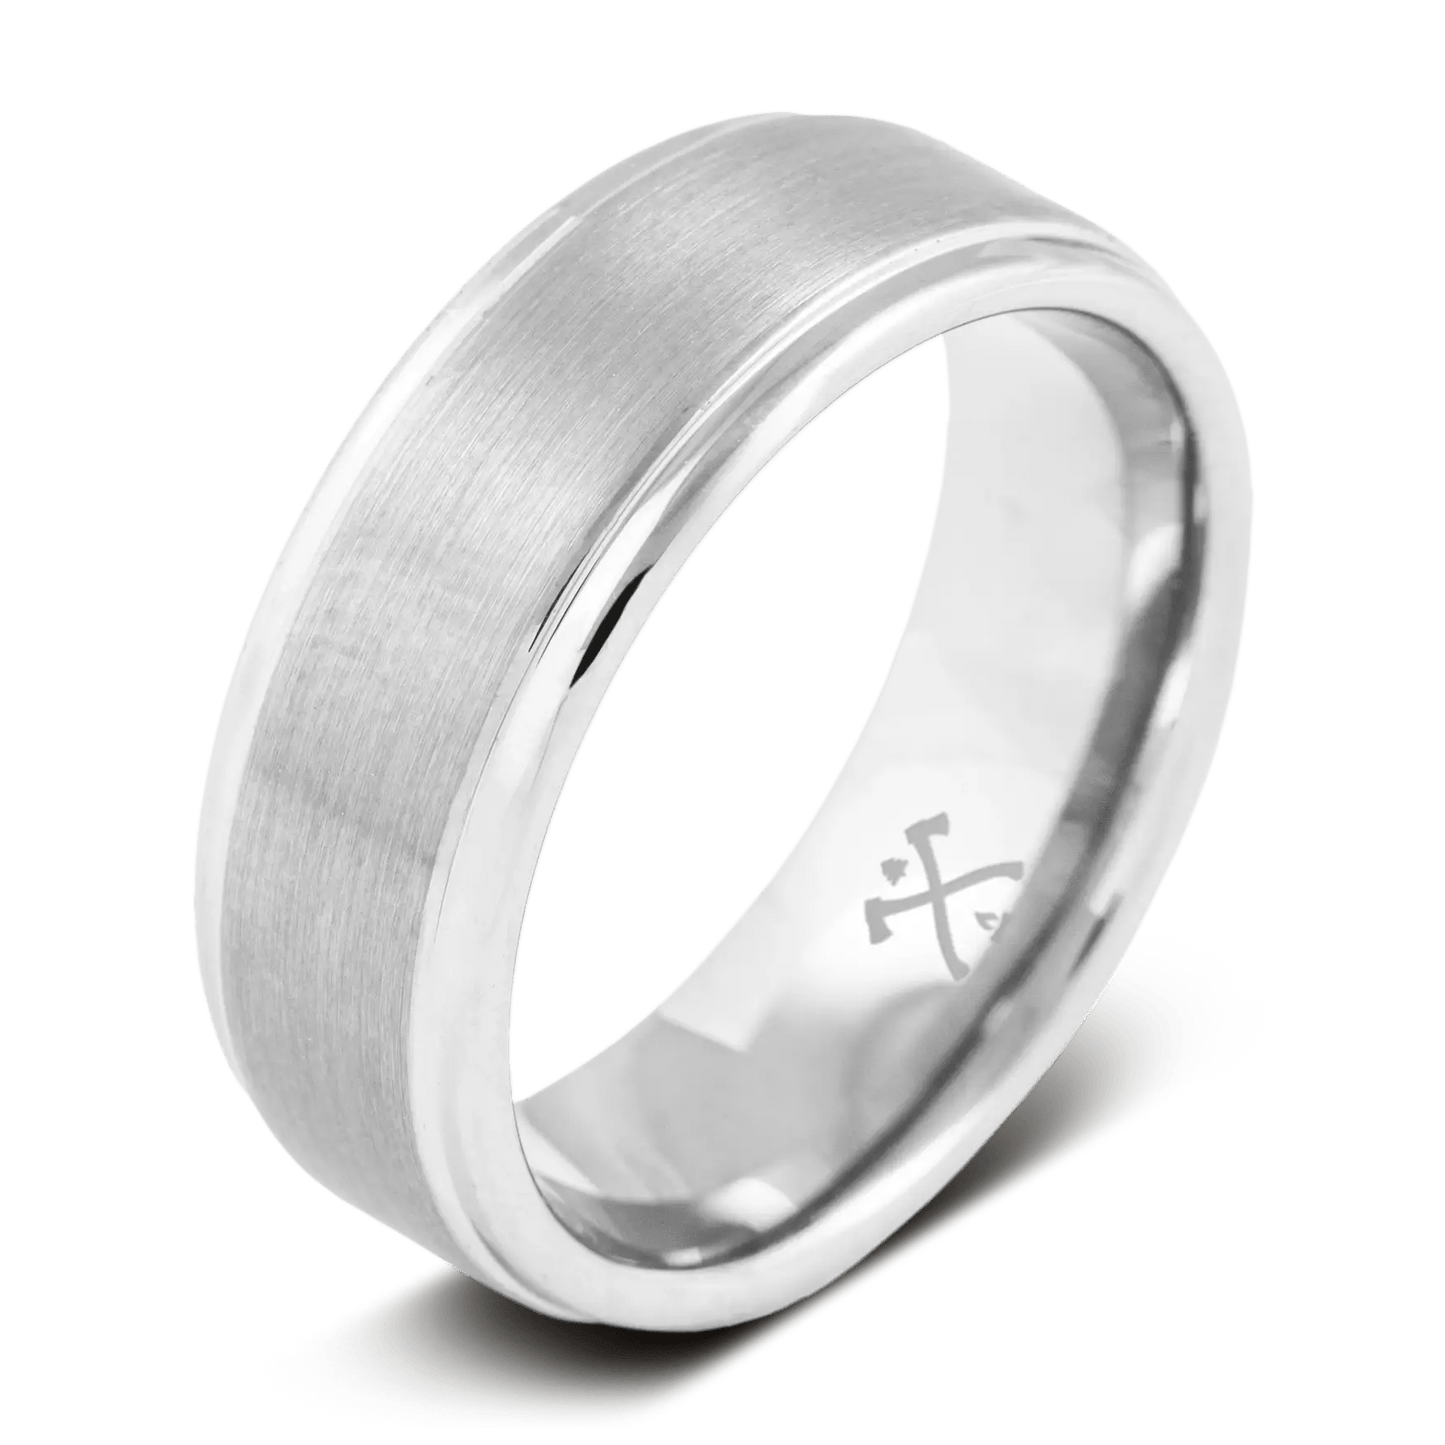 The Hero - Men's Silver Tungsten Wedding Ring | Manly Bands